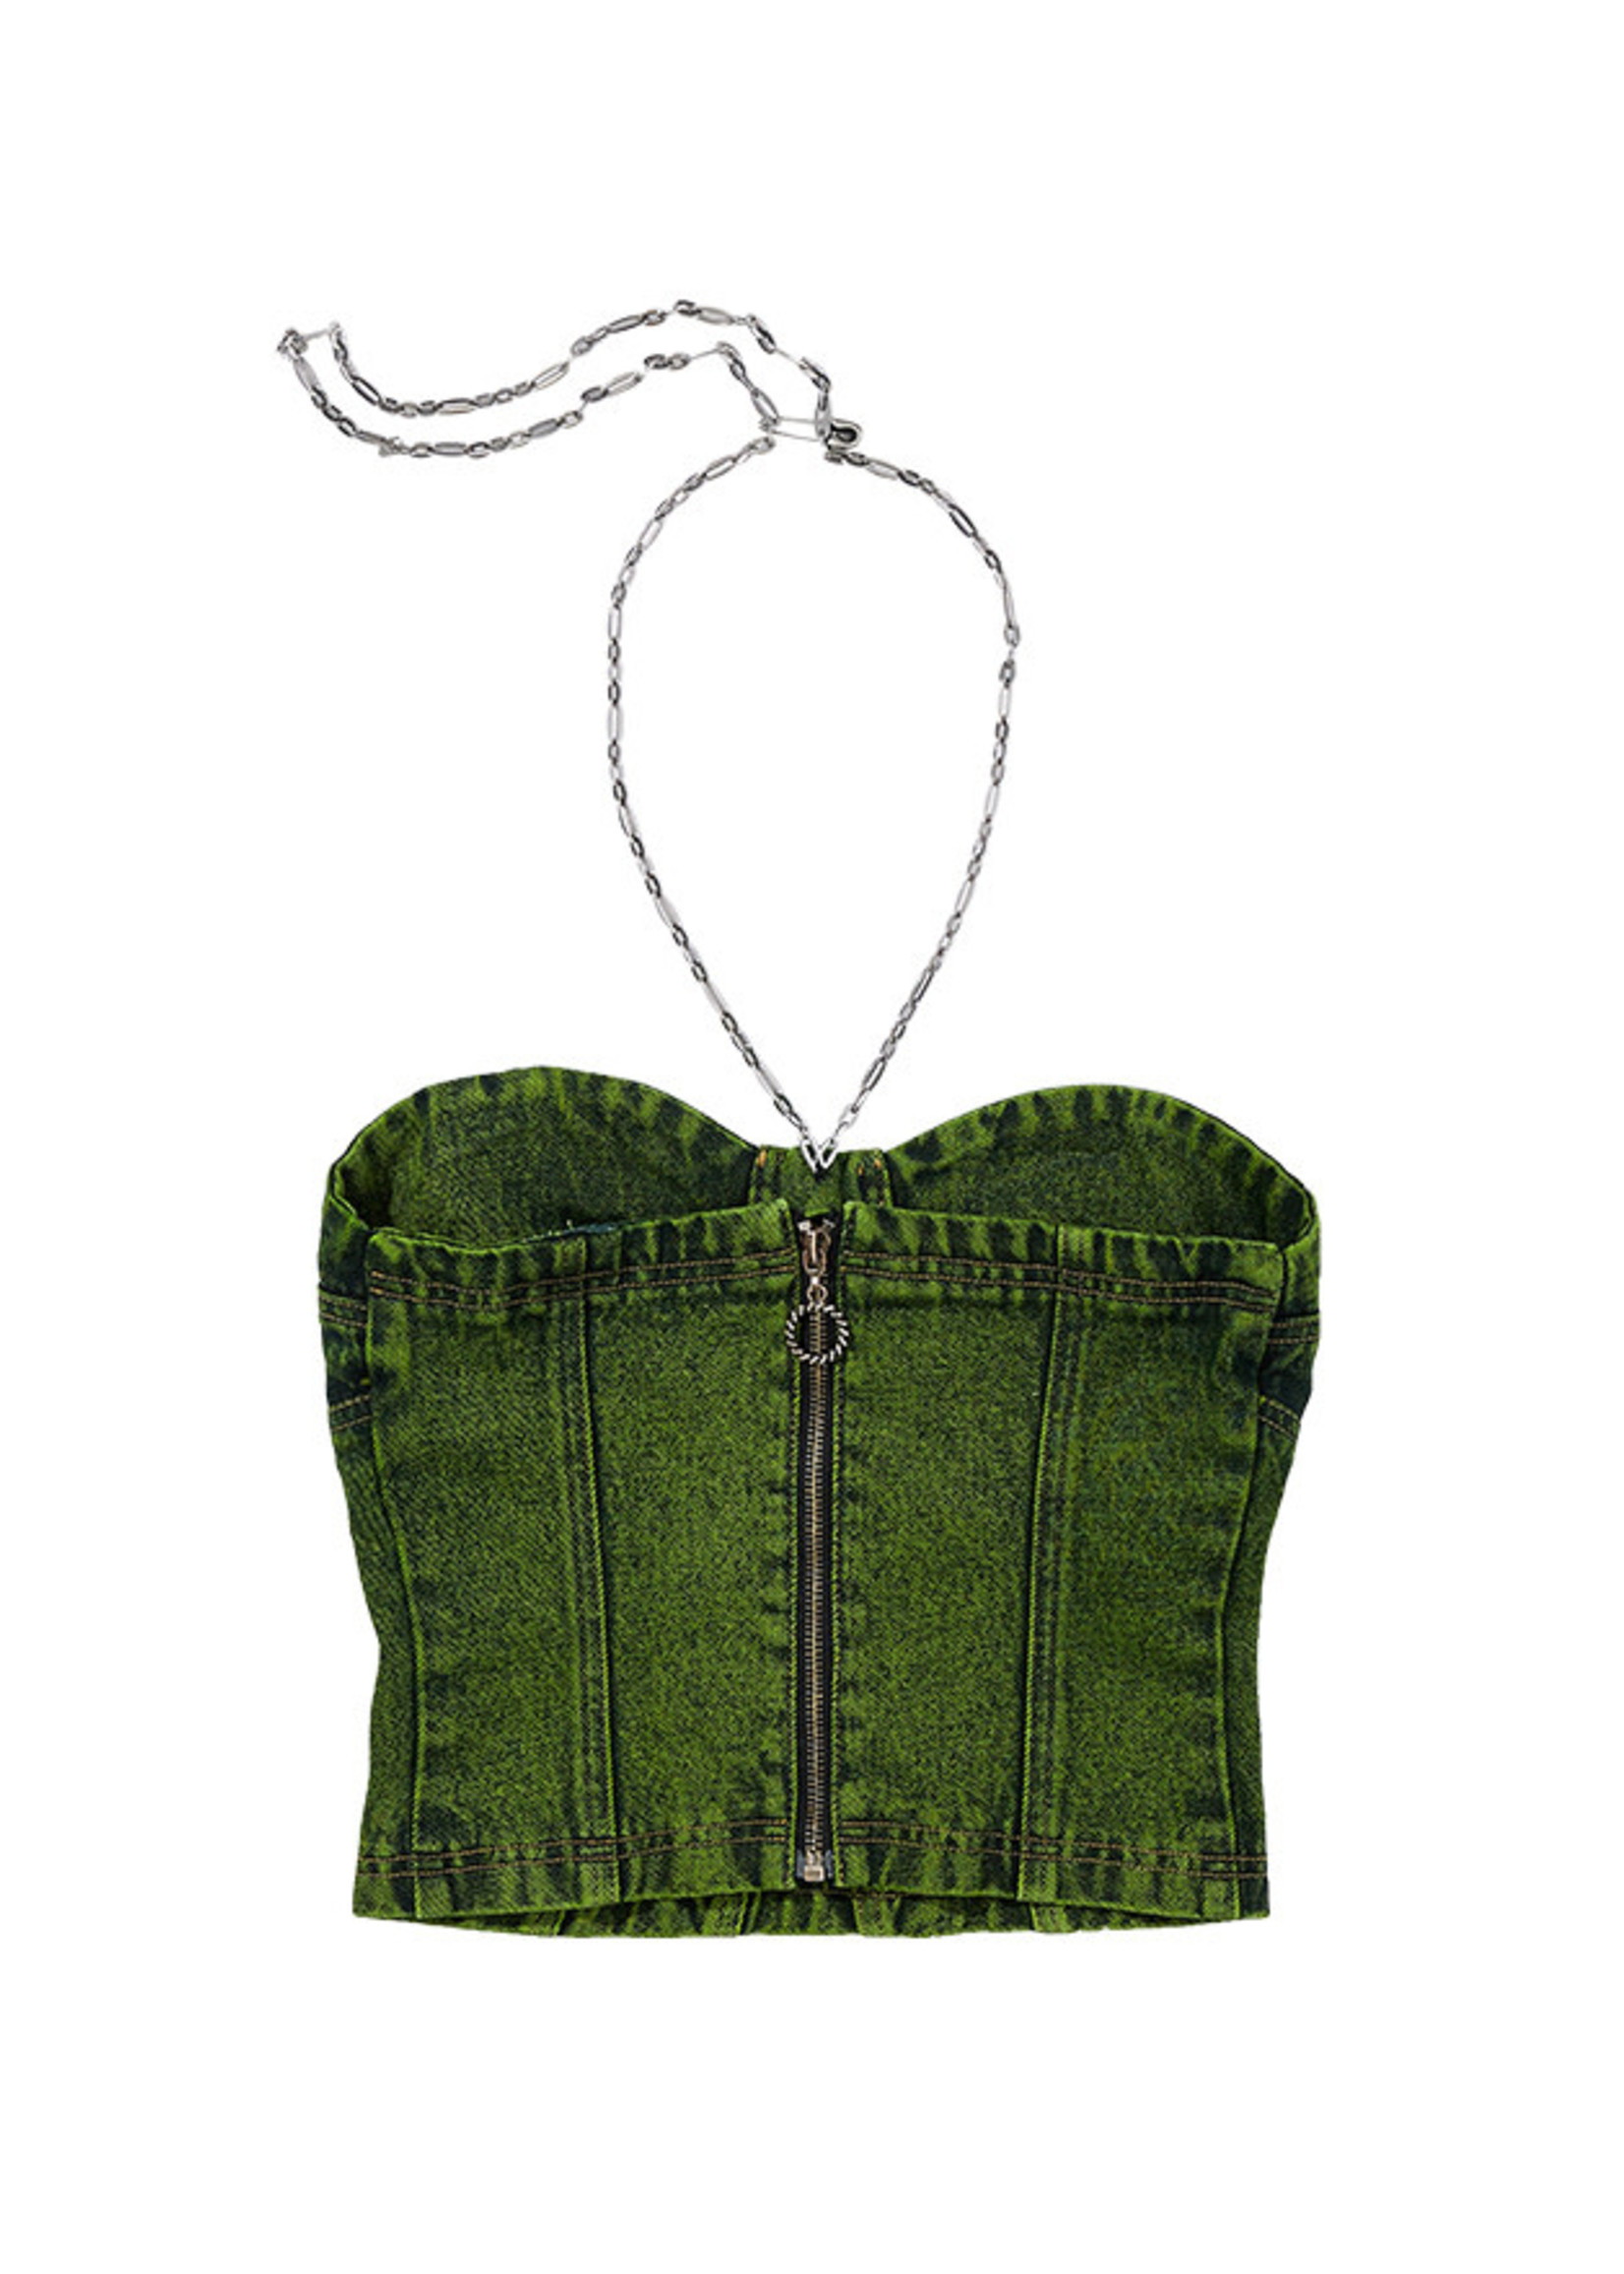 ANDERSSON BELL Denim Bustier with metal Chain in Acid Green